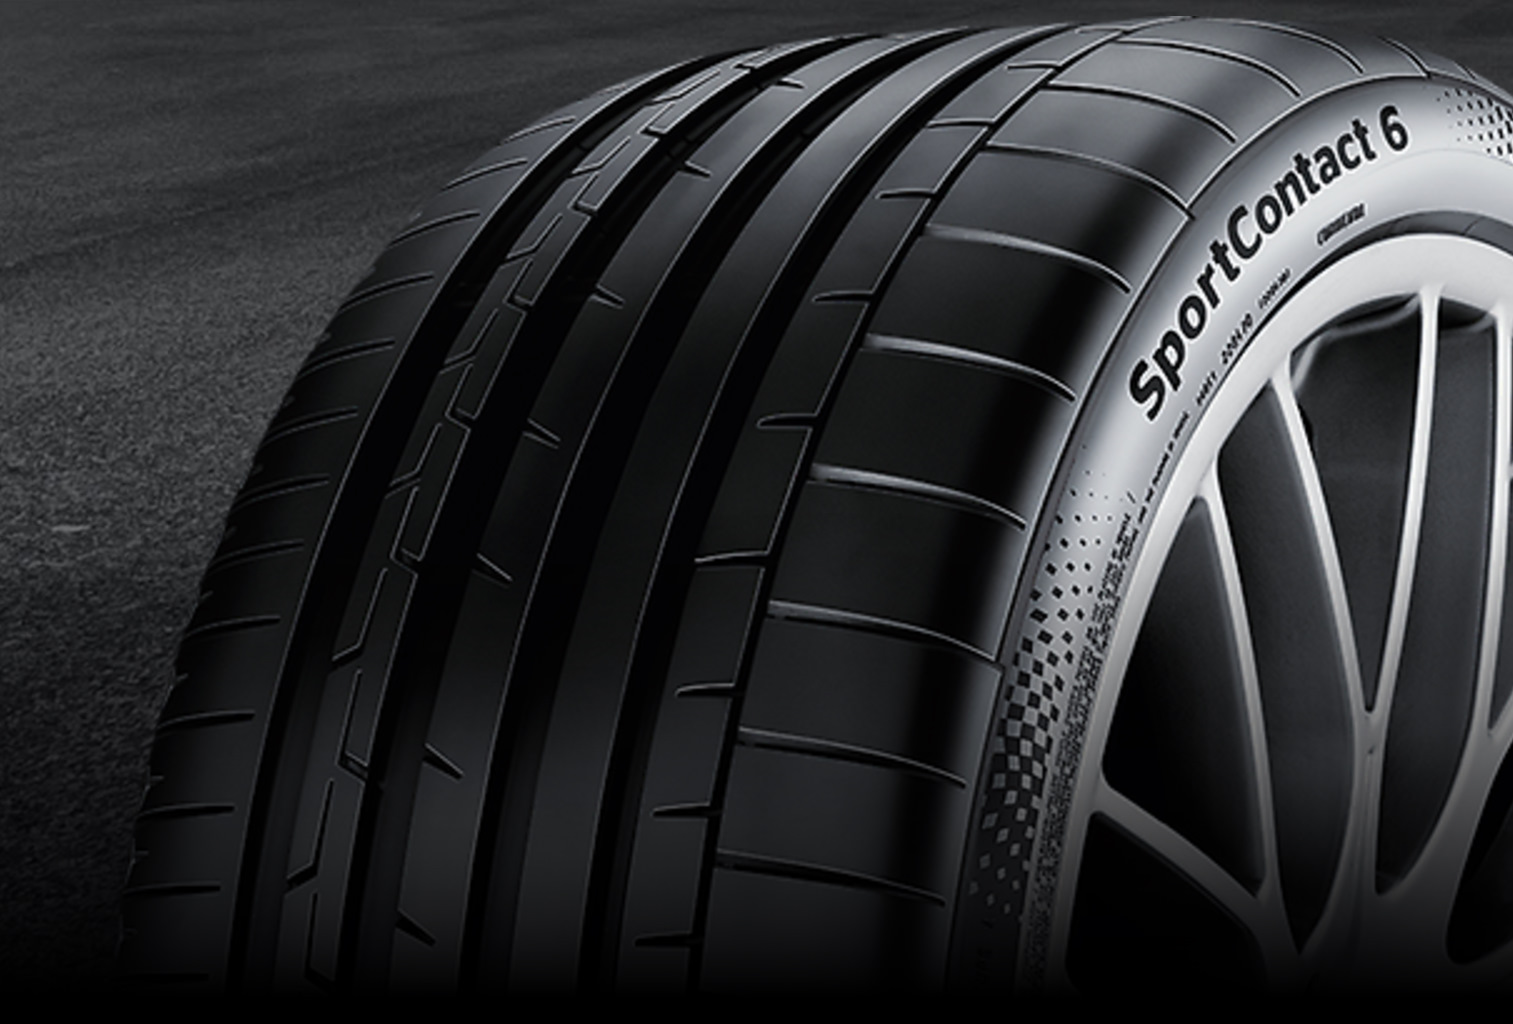 Continental sport 5. Continental SPORTCONTACT 6 285/35 r21. Continental SPORTCONTACT 6. Continental CONTISPORTCONTACT 6. Шины Continental CONTISPORTCONTACT 6.